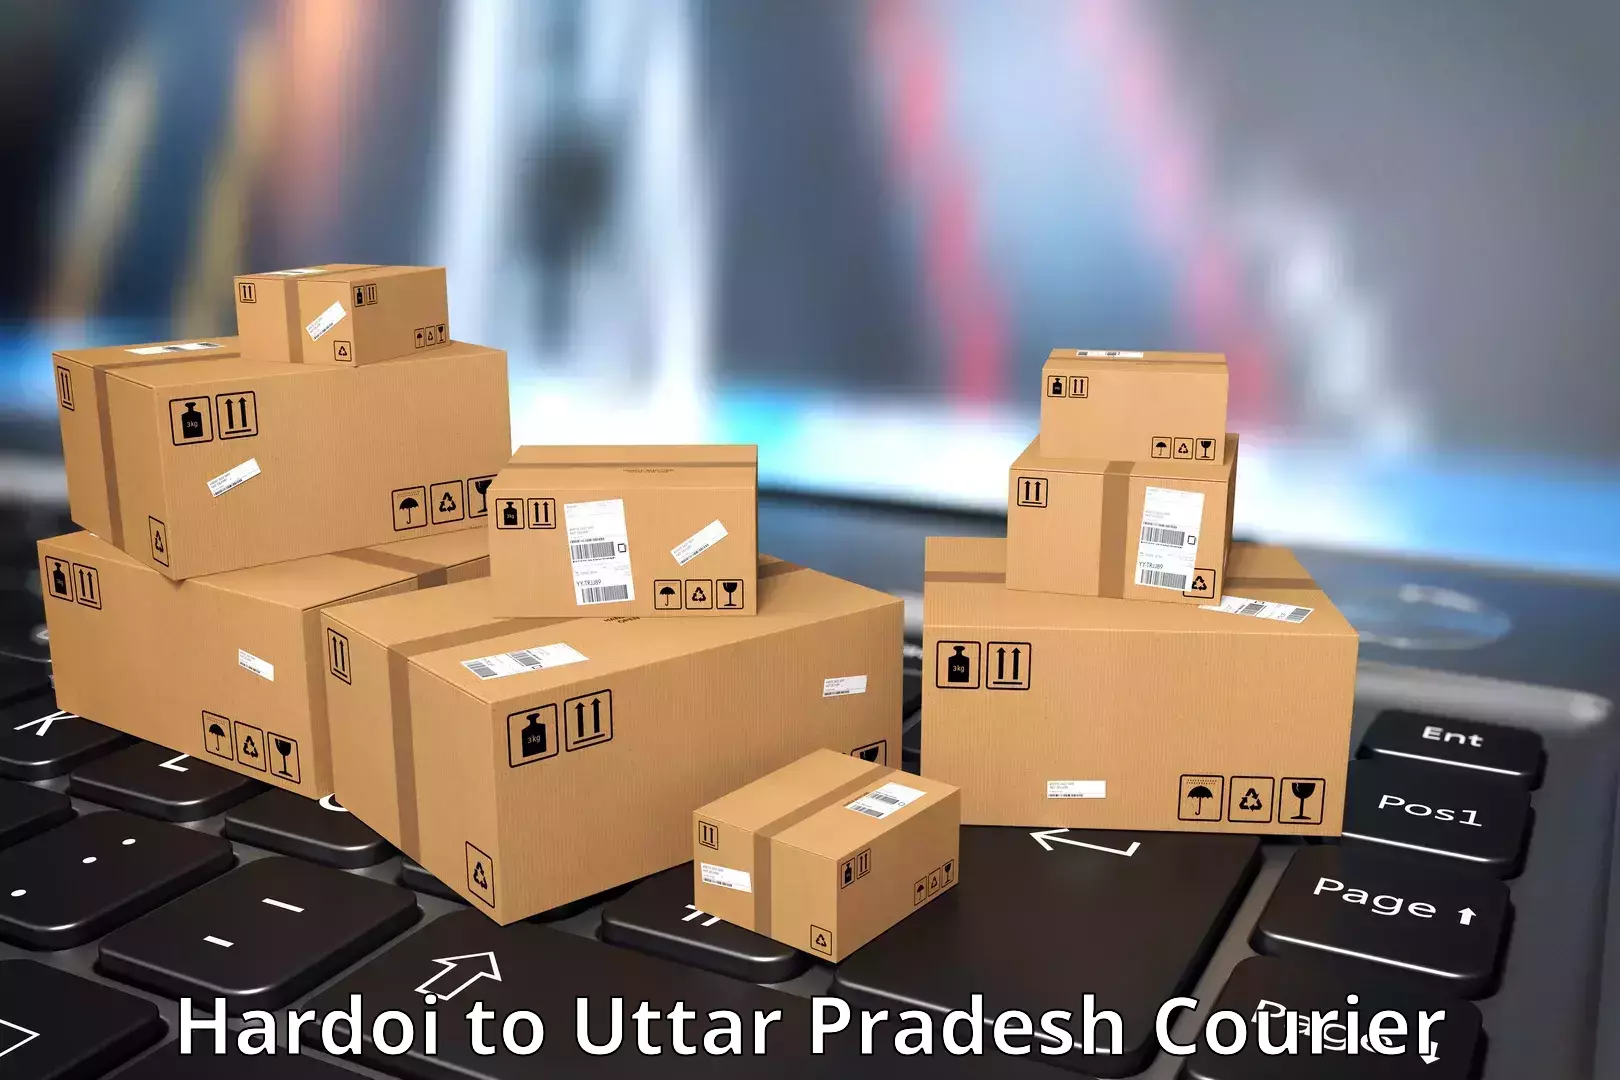 Residential courier service Hardoi to Lucknow